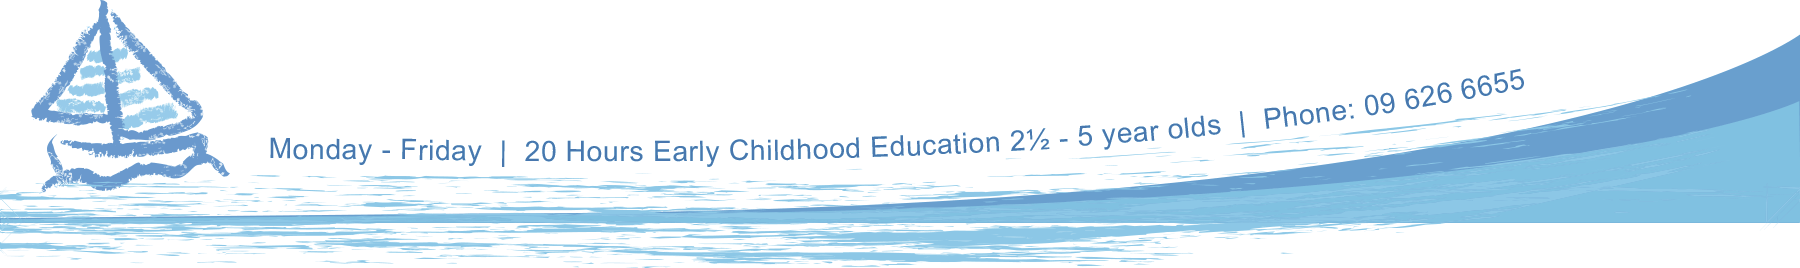 Monday - Friday  |  20 Hours Early Childhood Education 2½ - 5 year olds  |  Phone: 09 626 6655